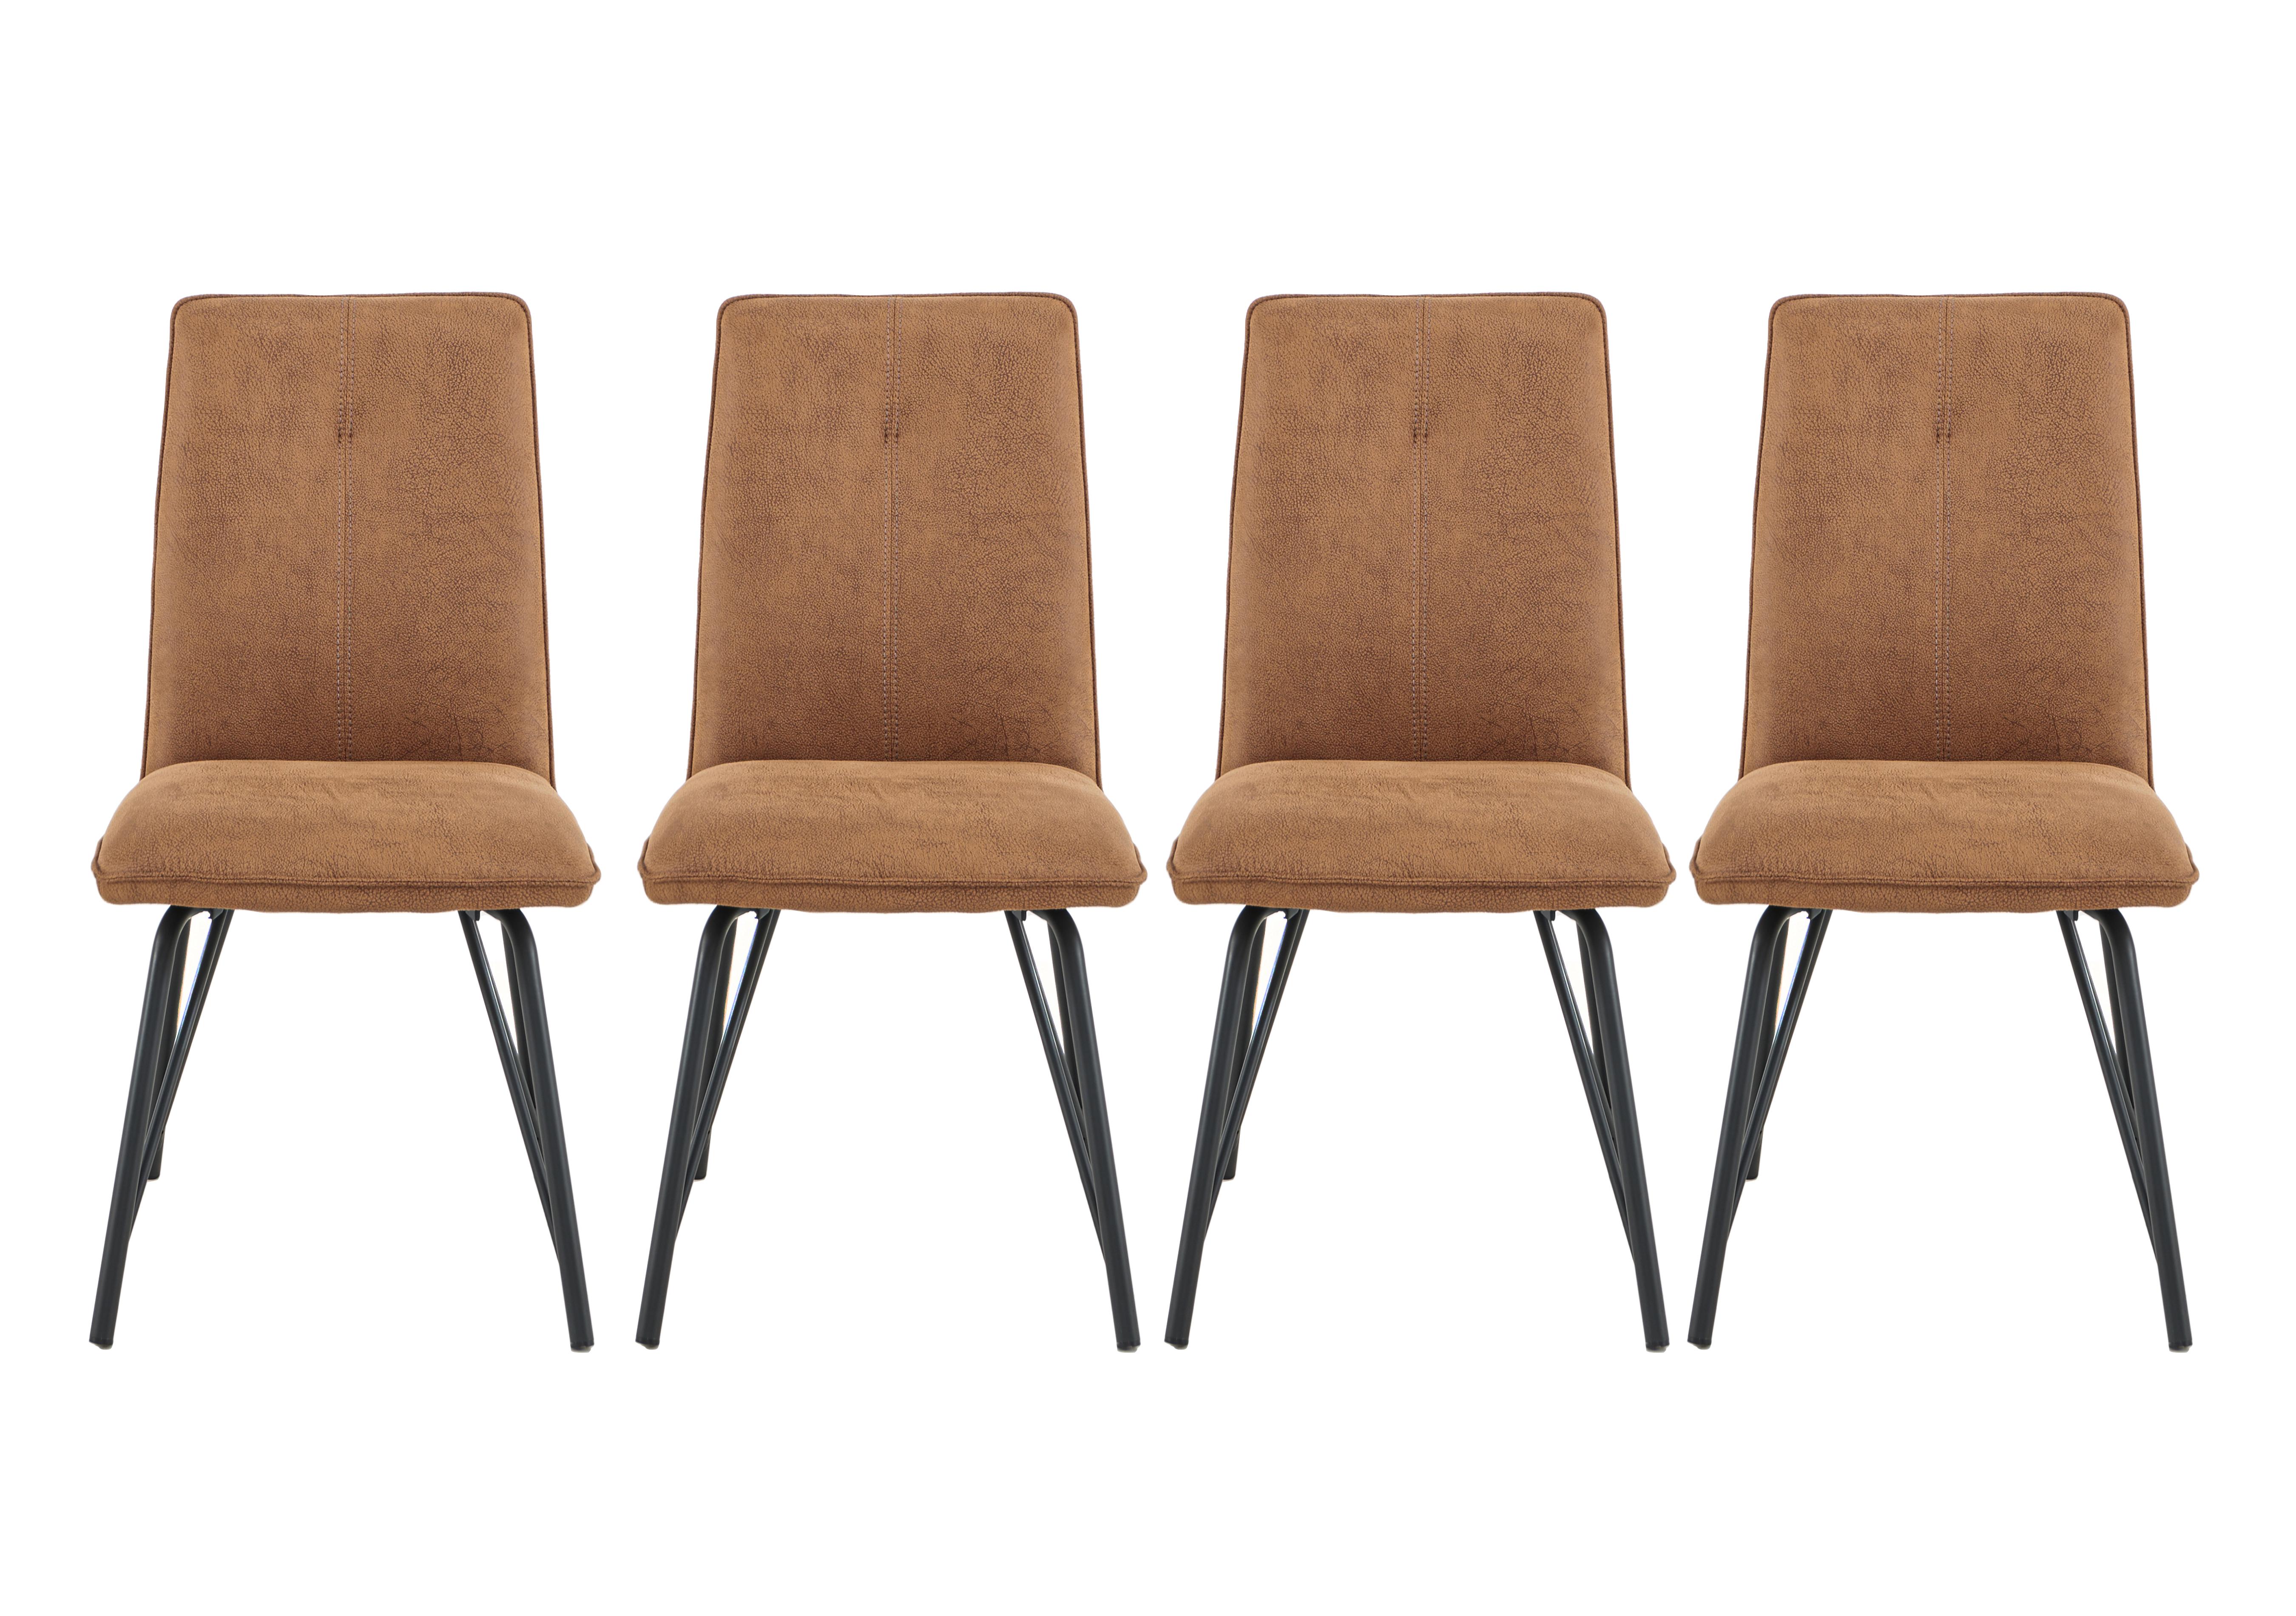 Austin Set of 4 Dining Chairs in Cognac on Furniture Village